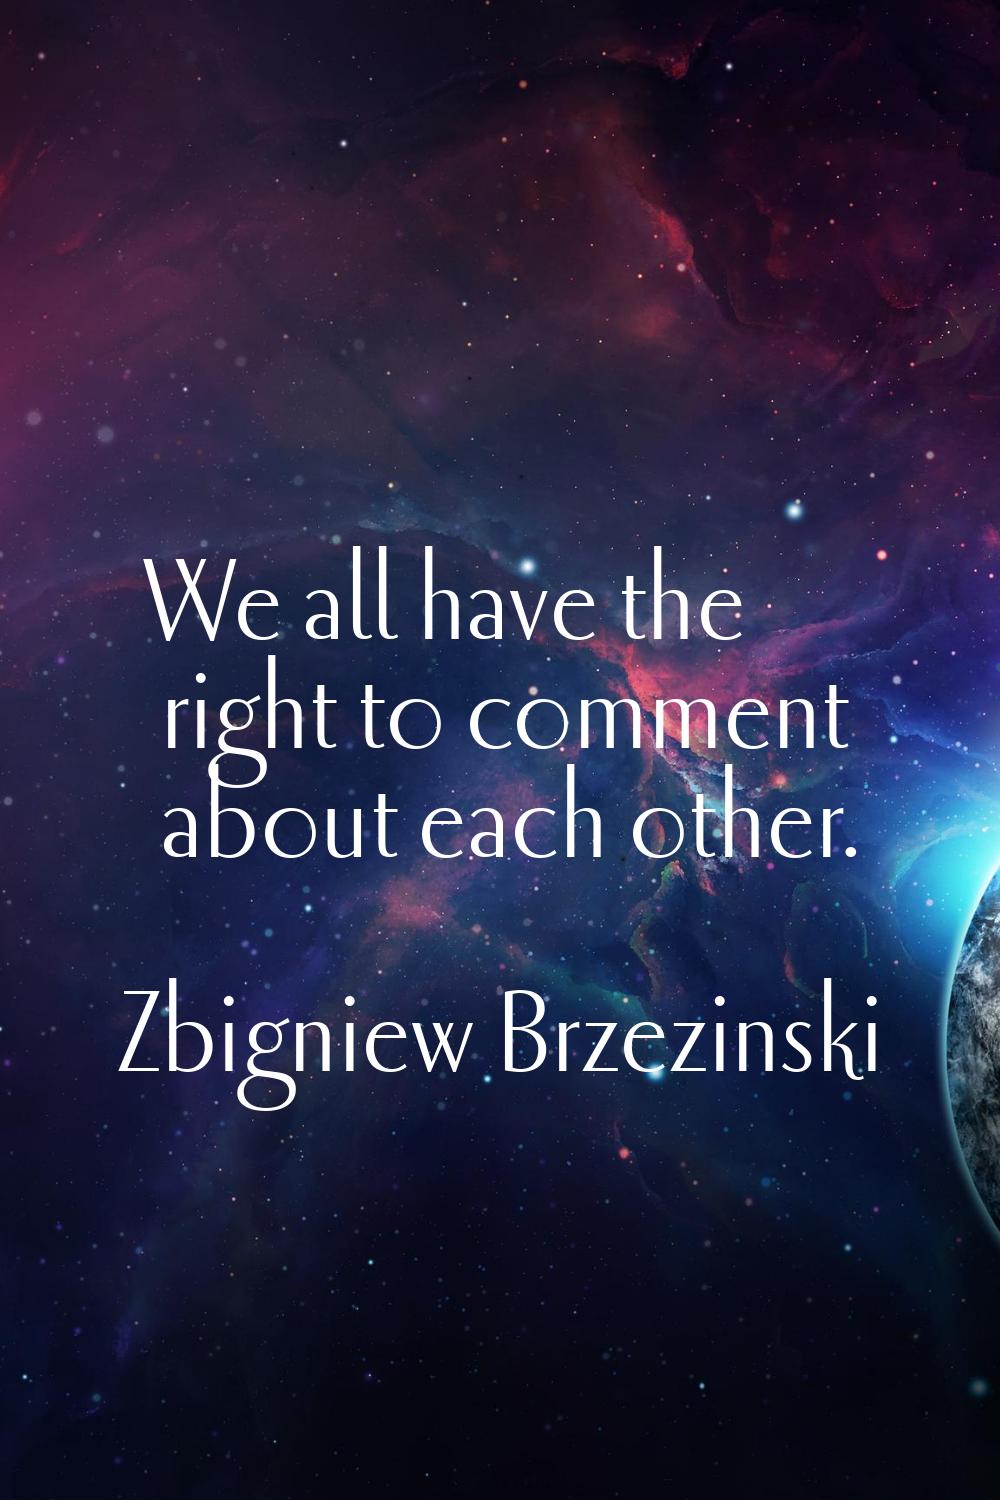 We all have the right to comment about each other.